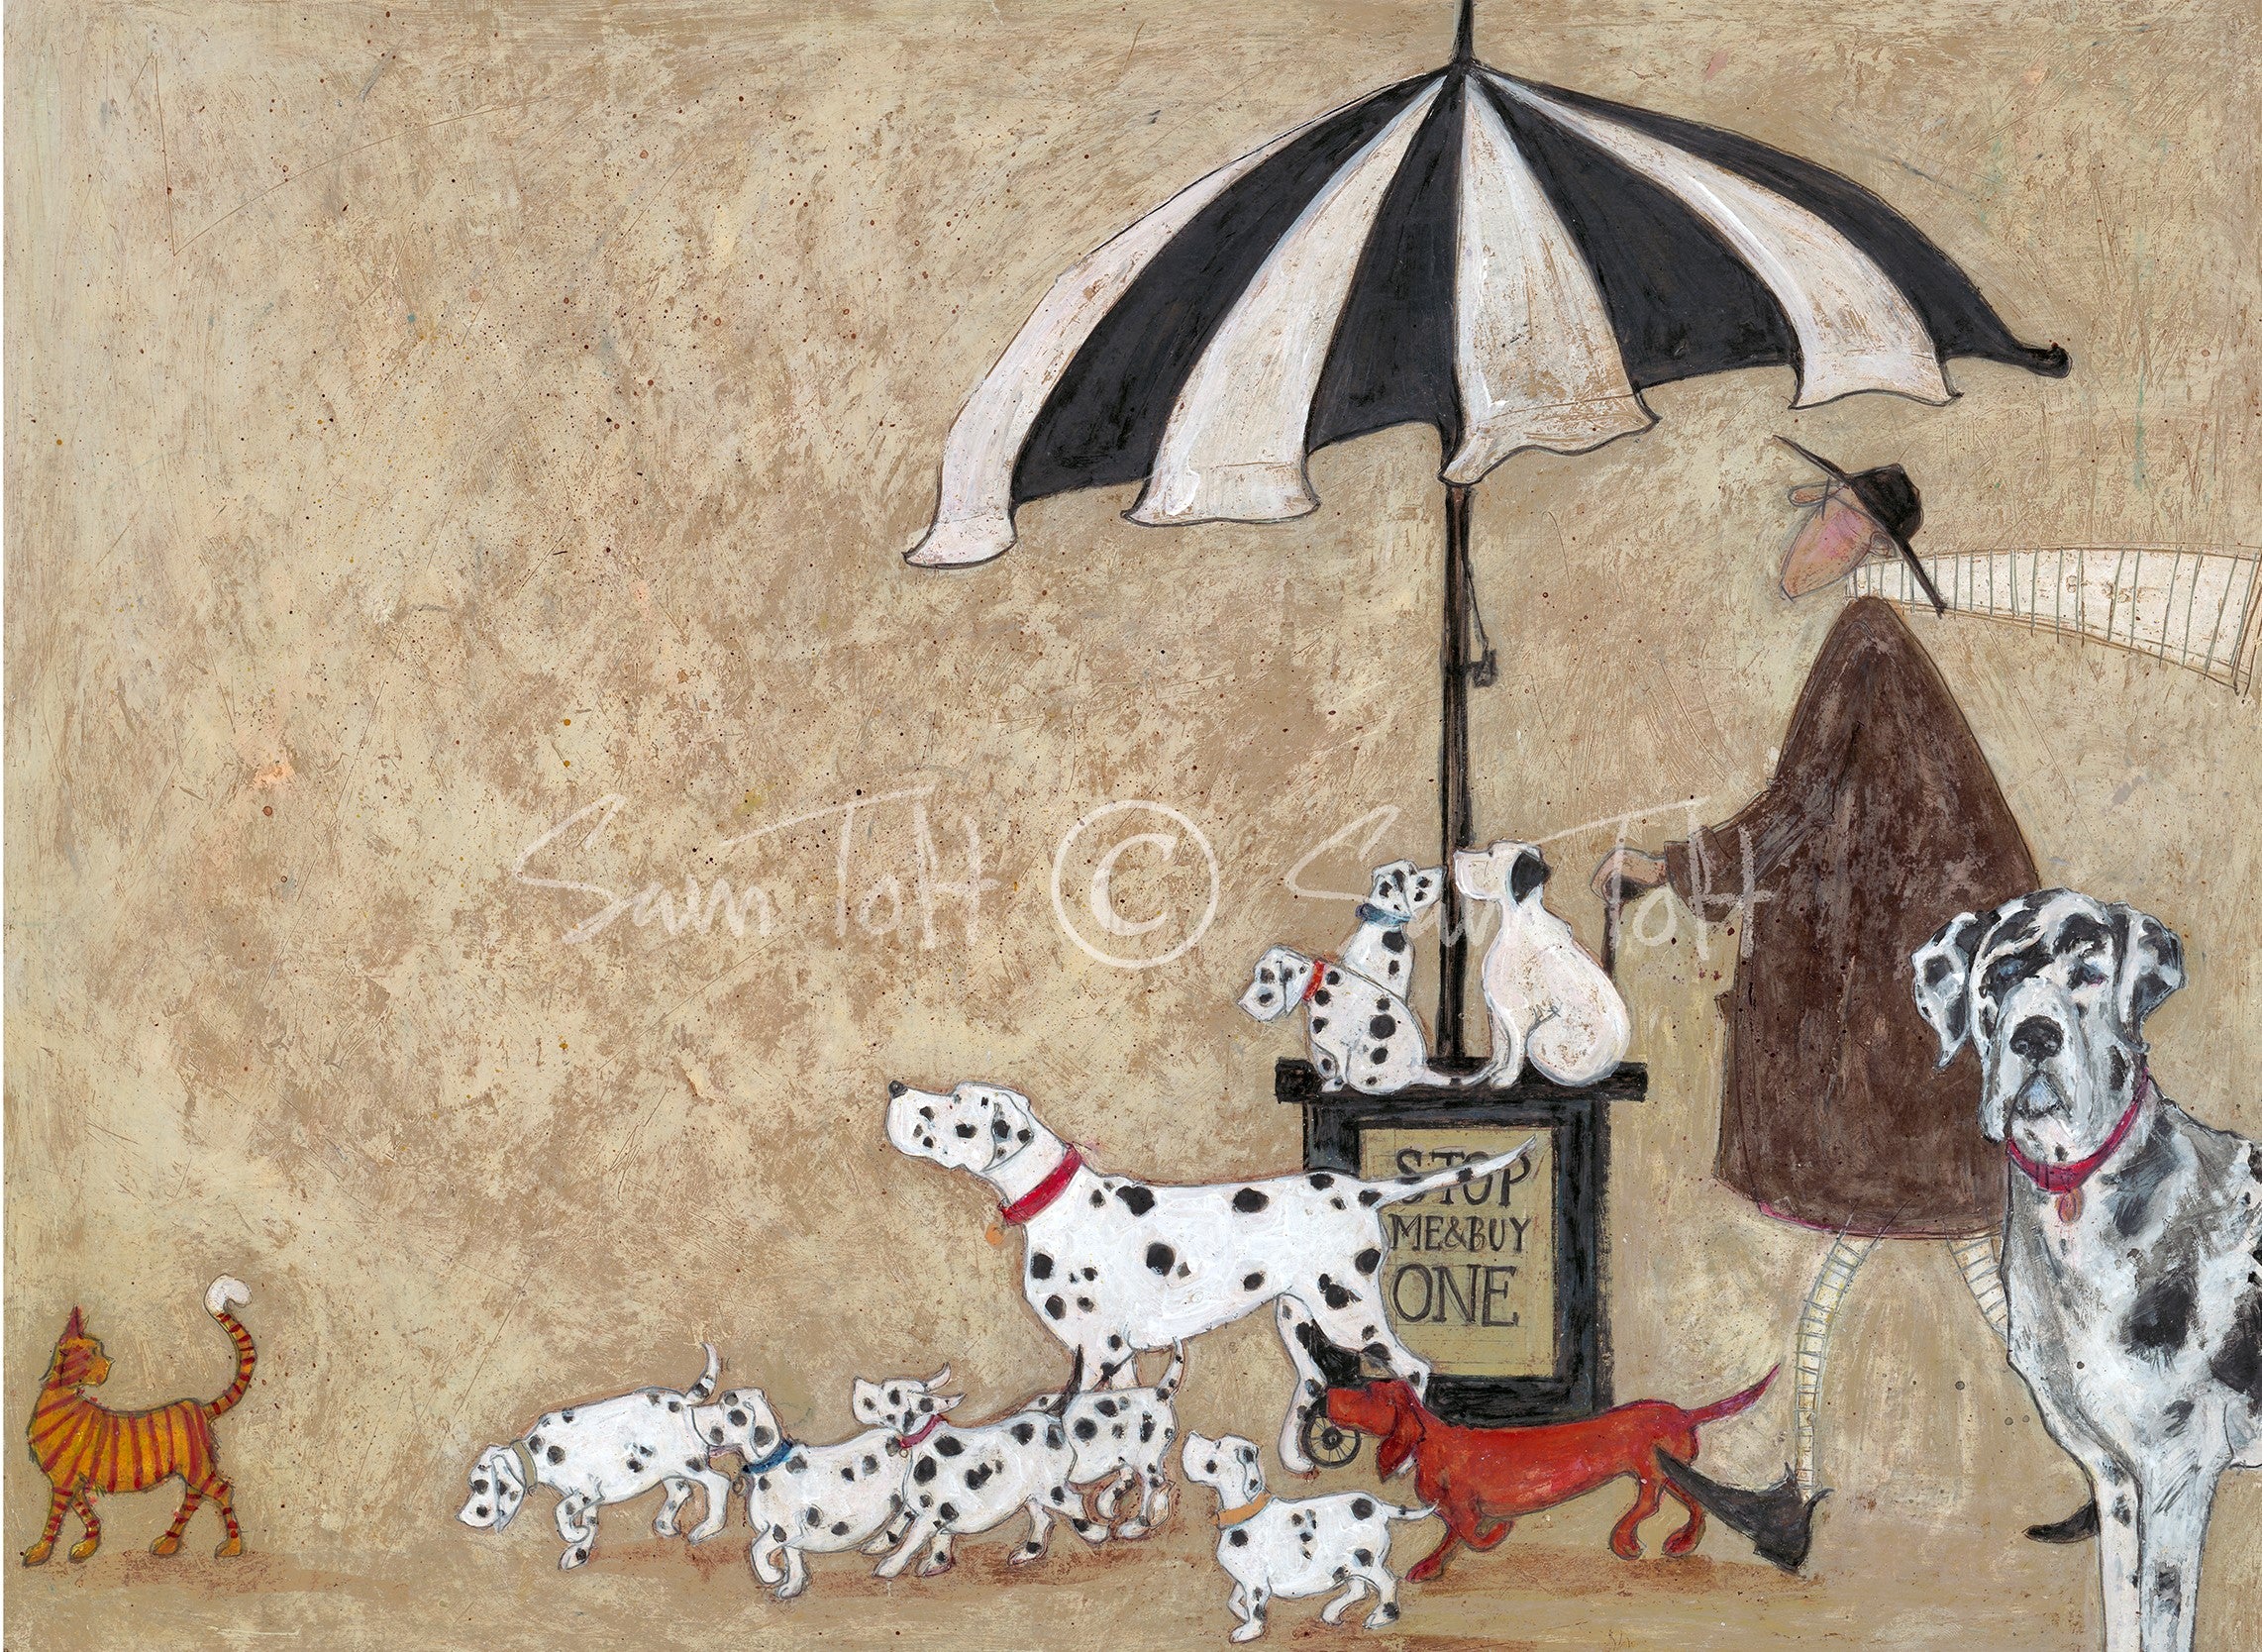 Sam Toft Stop me & buy one mounted new art